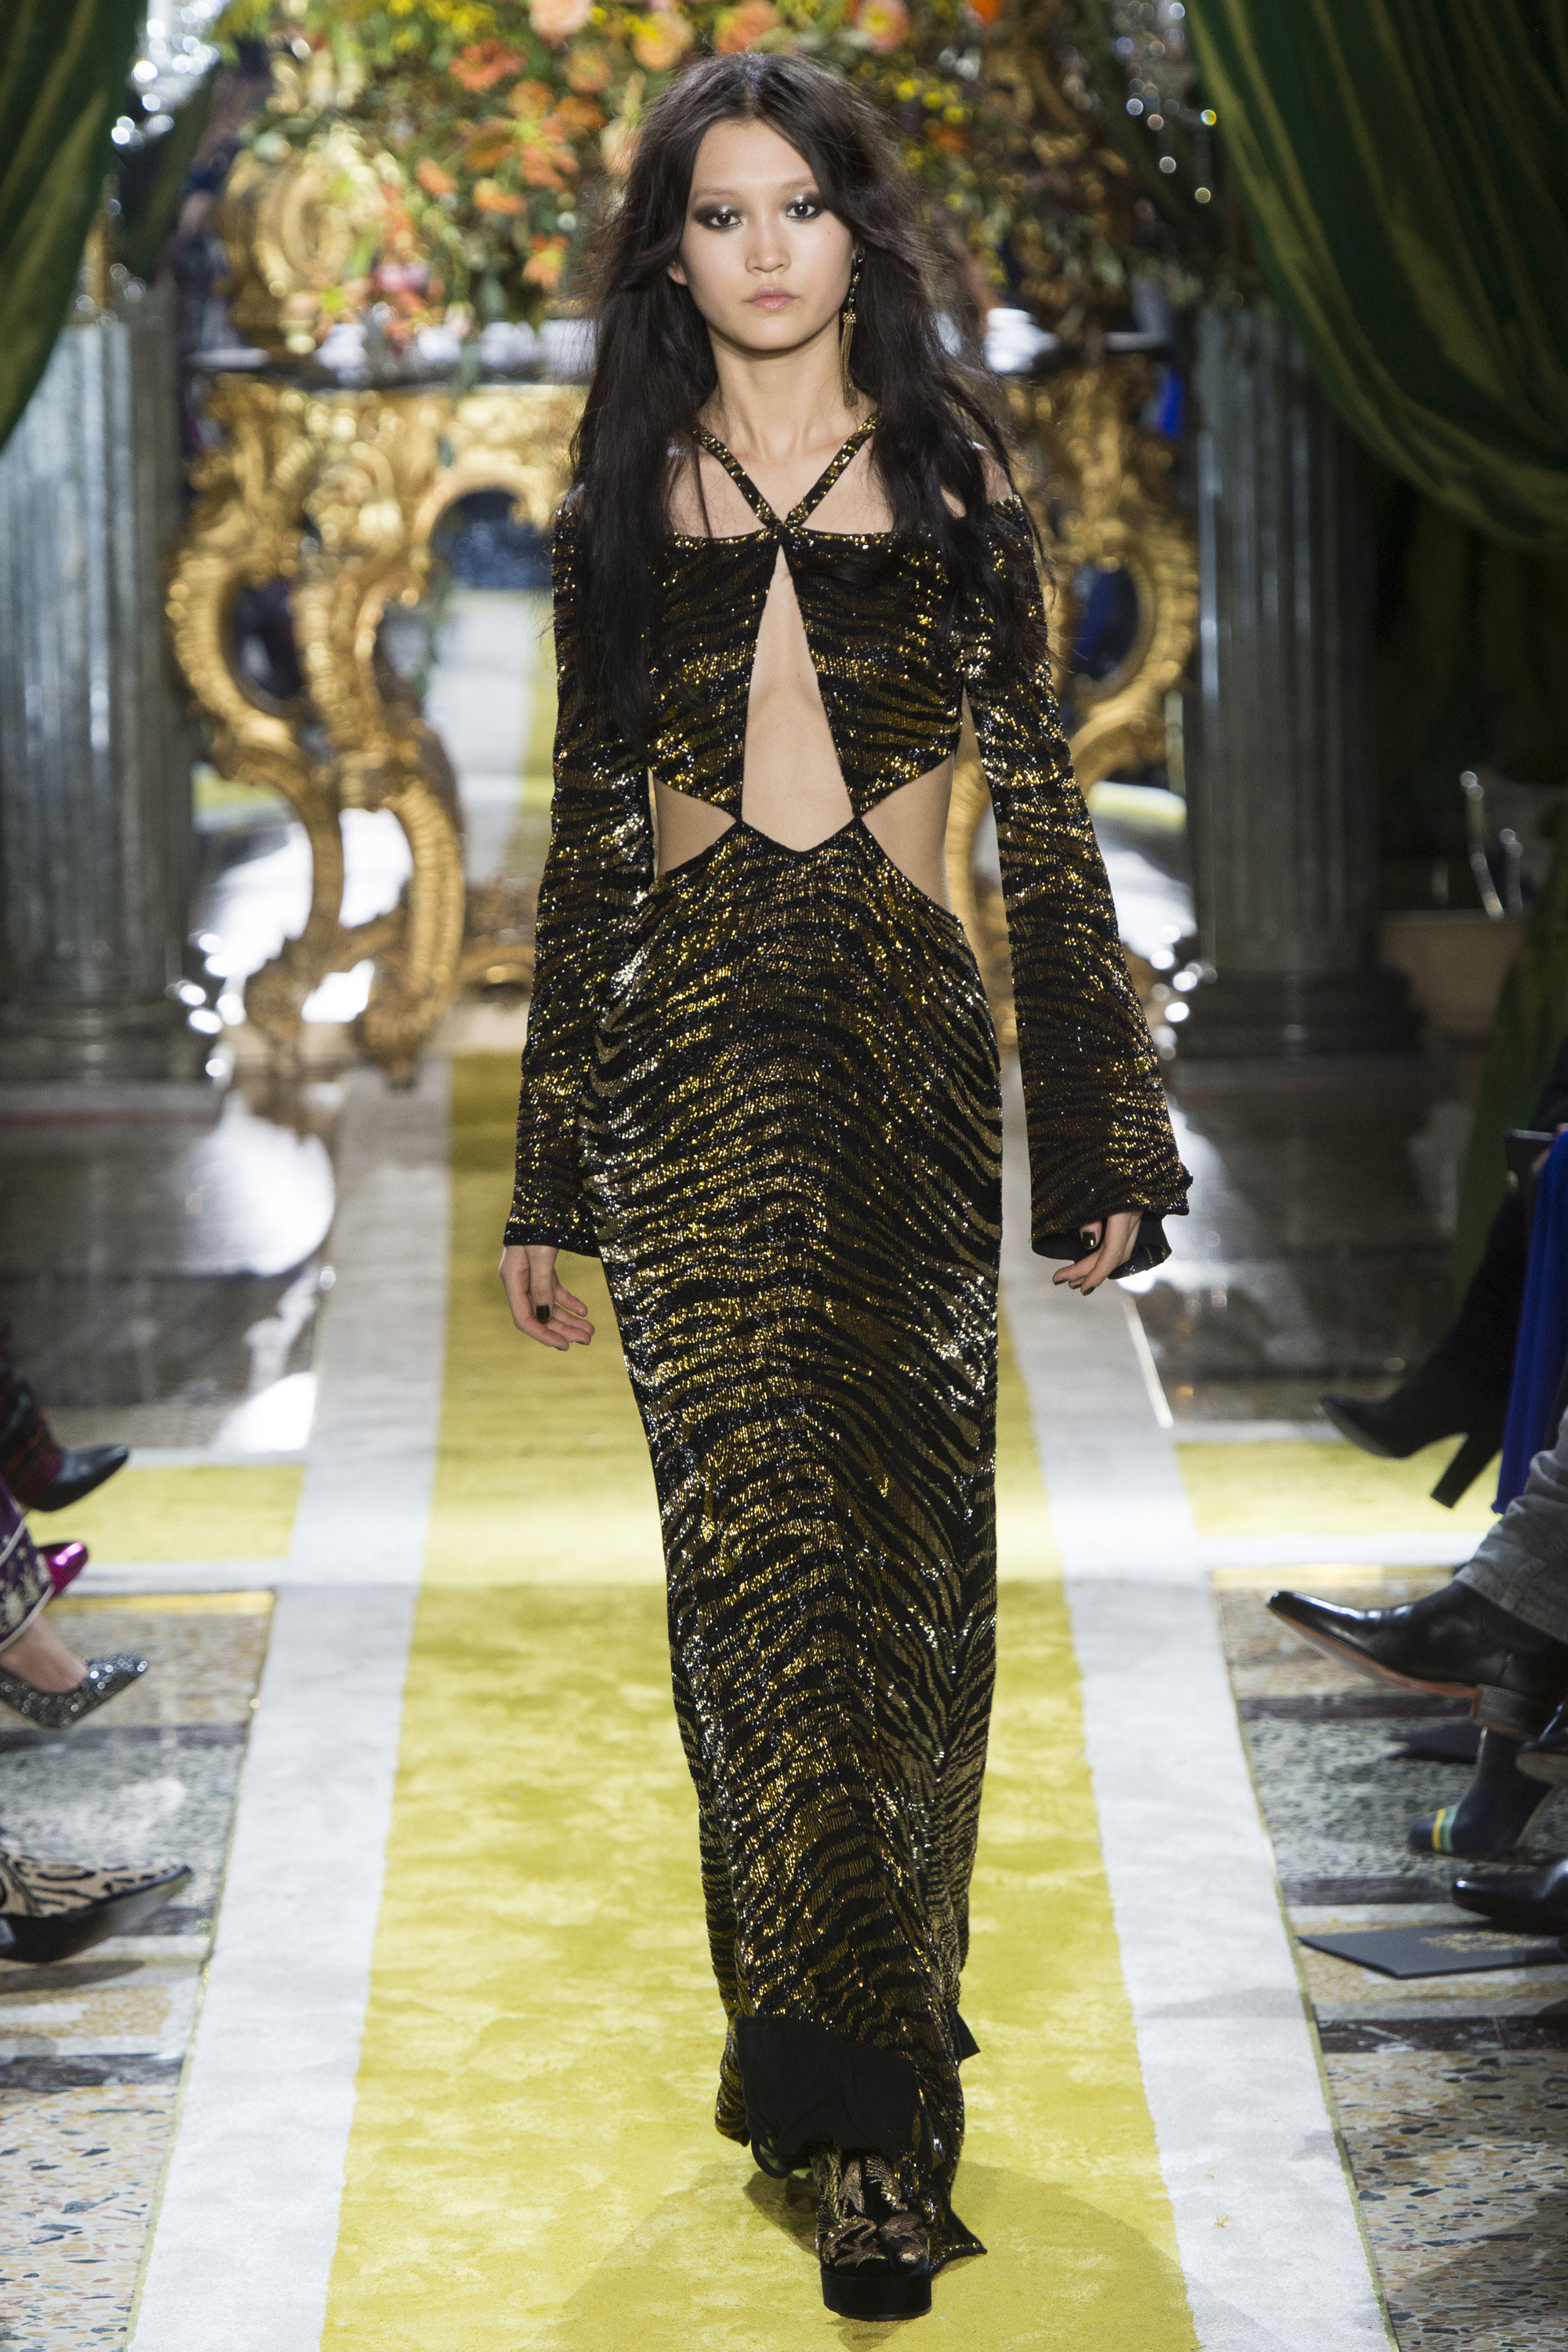 Roberto Cavalli Fall 2016 RTW Collection had a Seventies Glam Rock Vibe